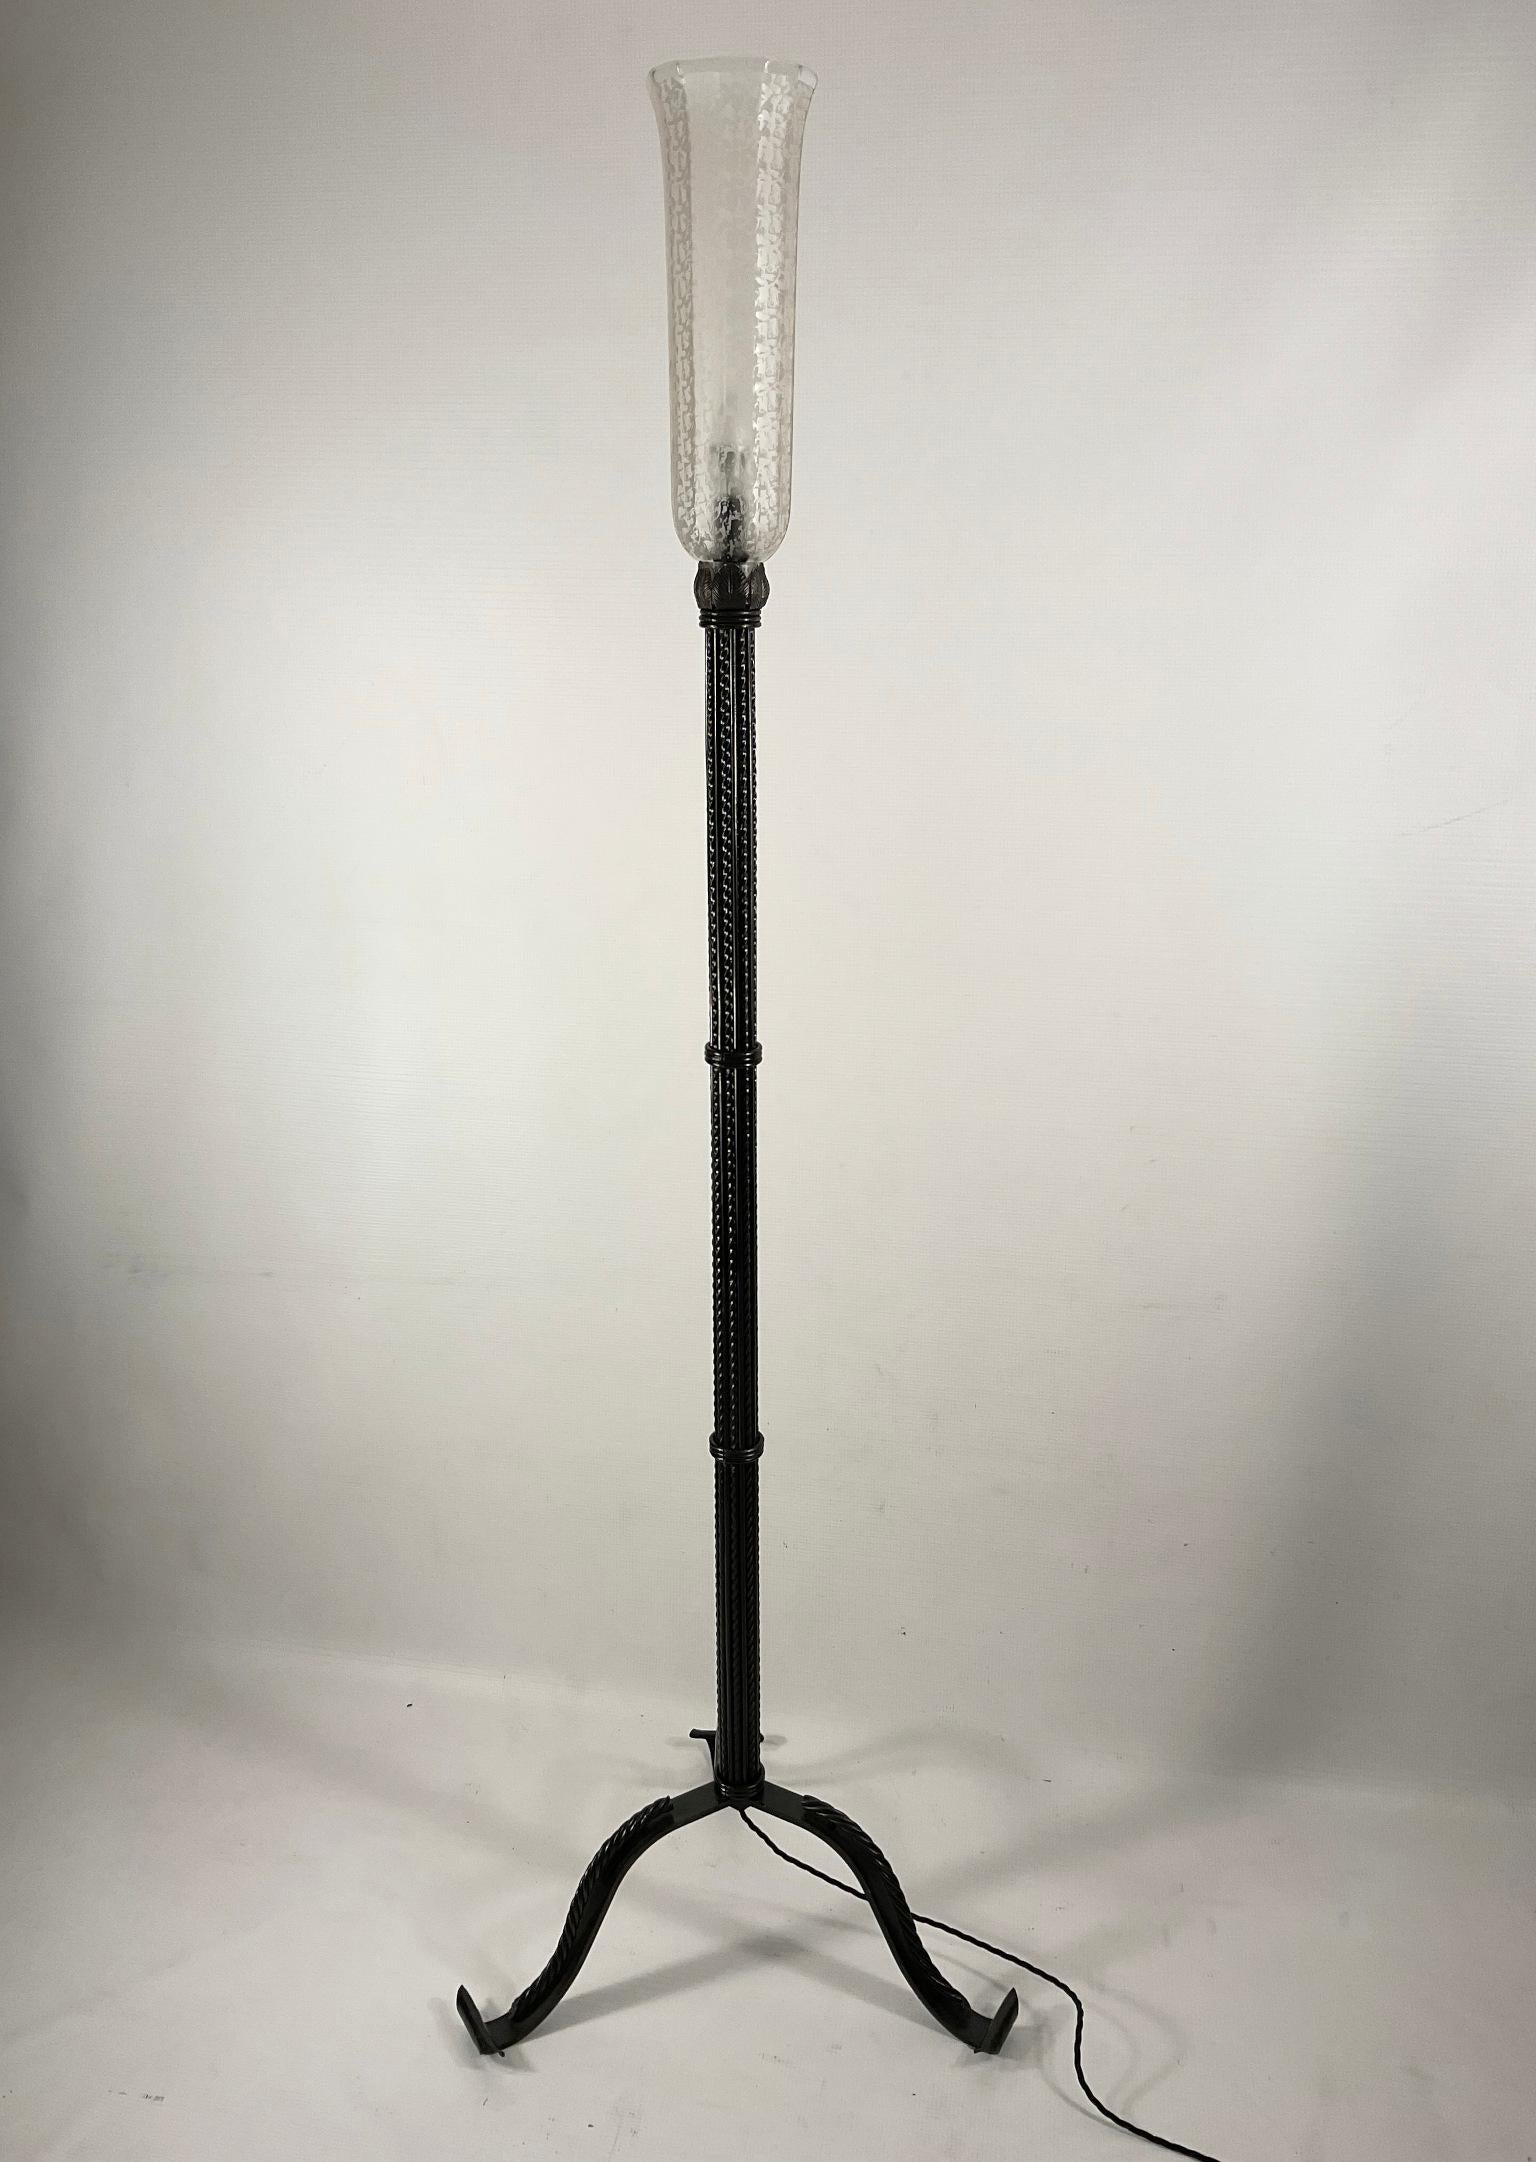 1920s French Art Deco floor lamp with etched glass shade.
This floor lamp represents an example of the quality and know-how of French artistic ironwork. This work is reminiscent of great names and masters of artistic ironwork such as Raymond